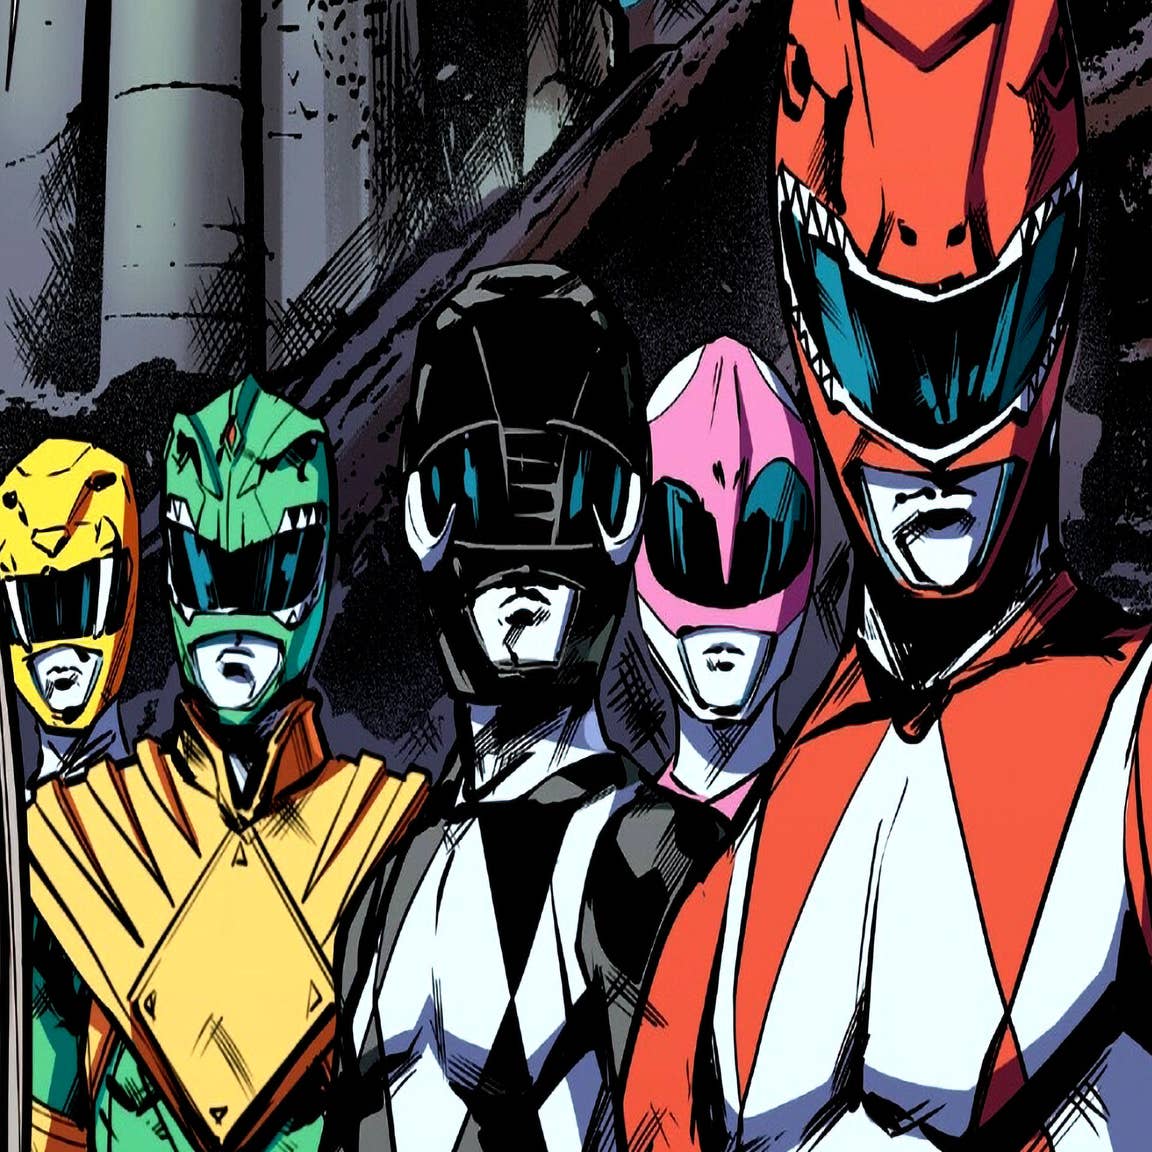 Graphic Novel Series Features Mighty Morphin Power Rangers in All